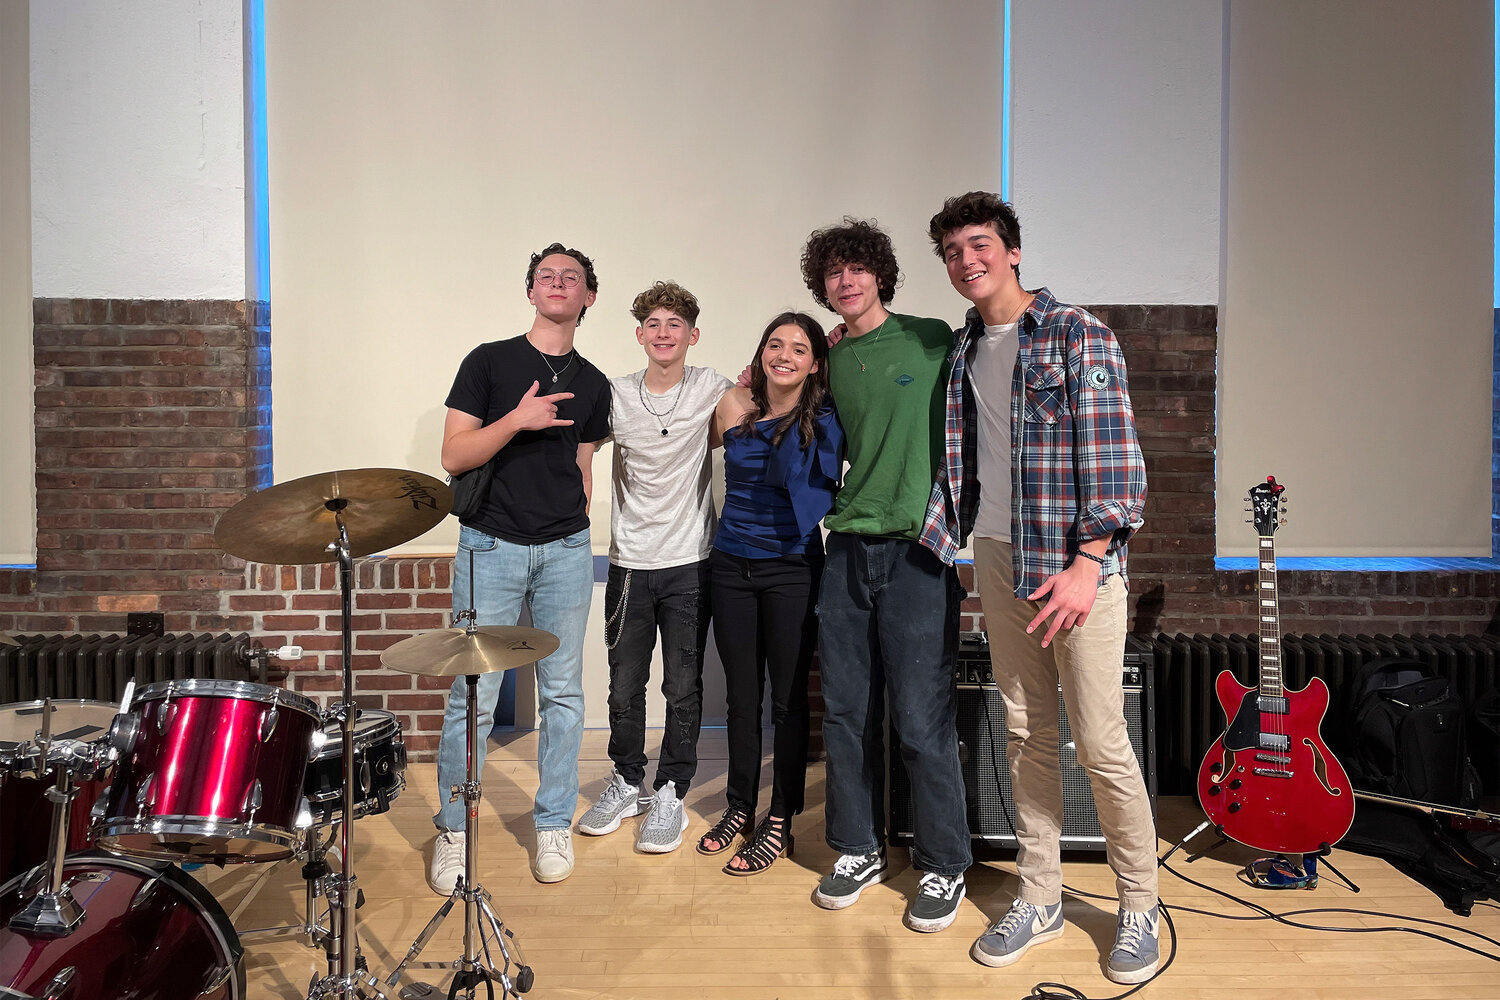 Ariana Sidman did not perform alone. She was accompanied by Urban Garage, which includes Micah Katchen, Raf Katchen, Cole Coper and Merrick Brannigan, who she recruited.